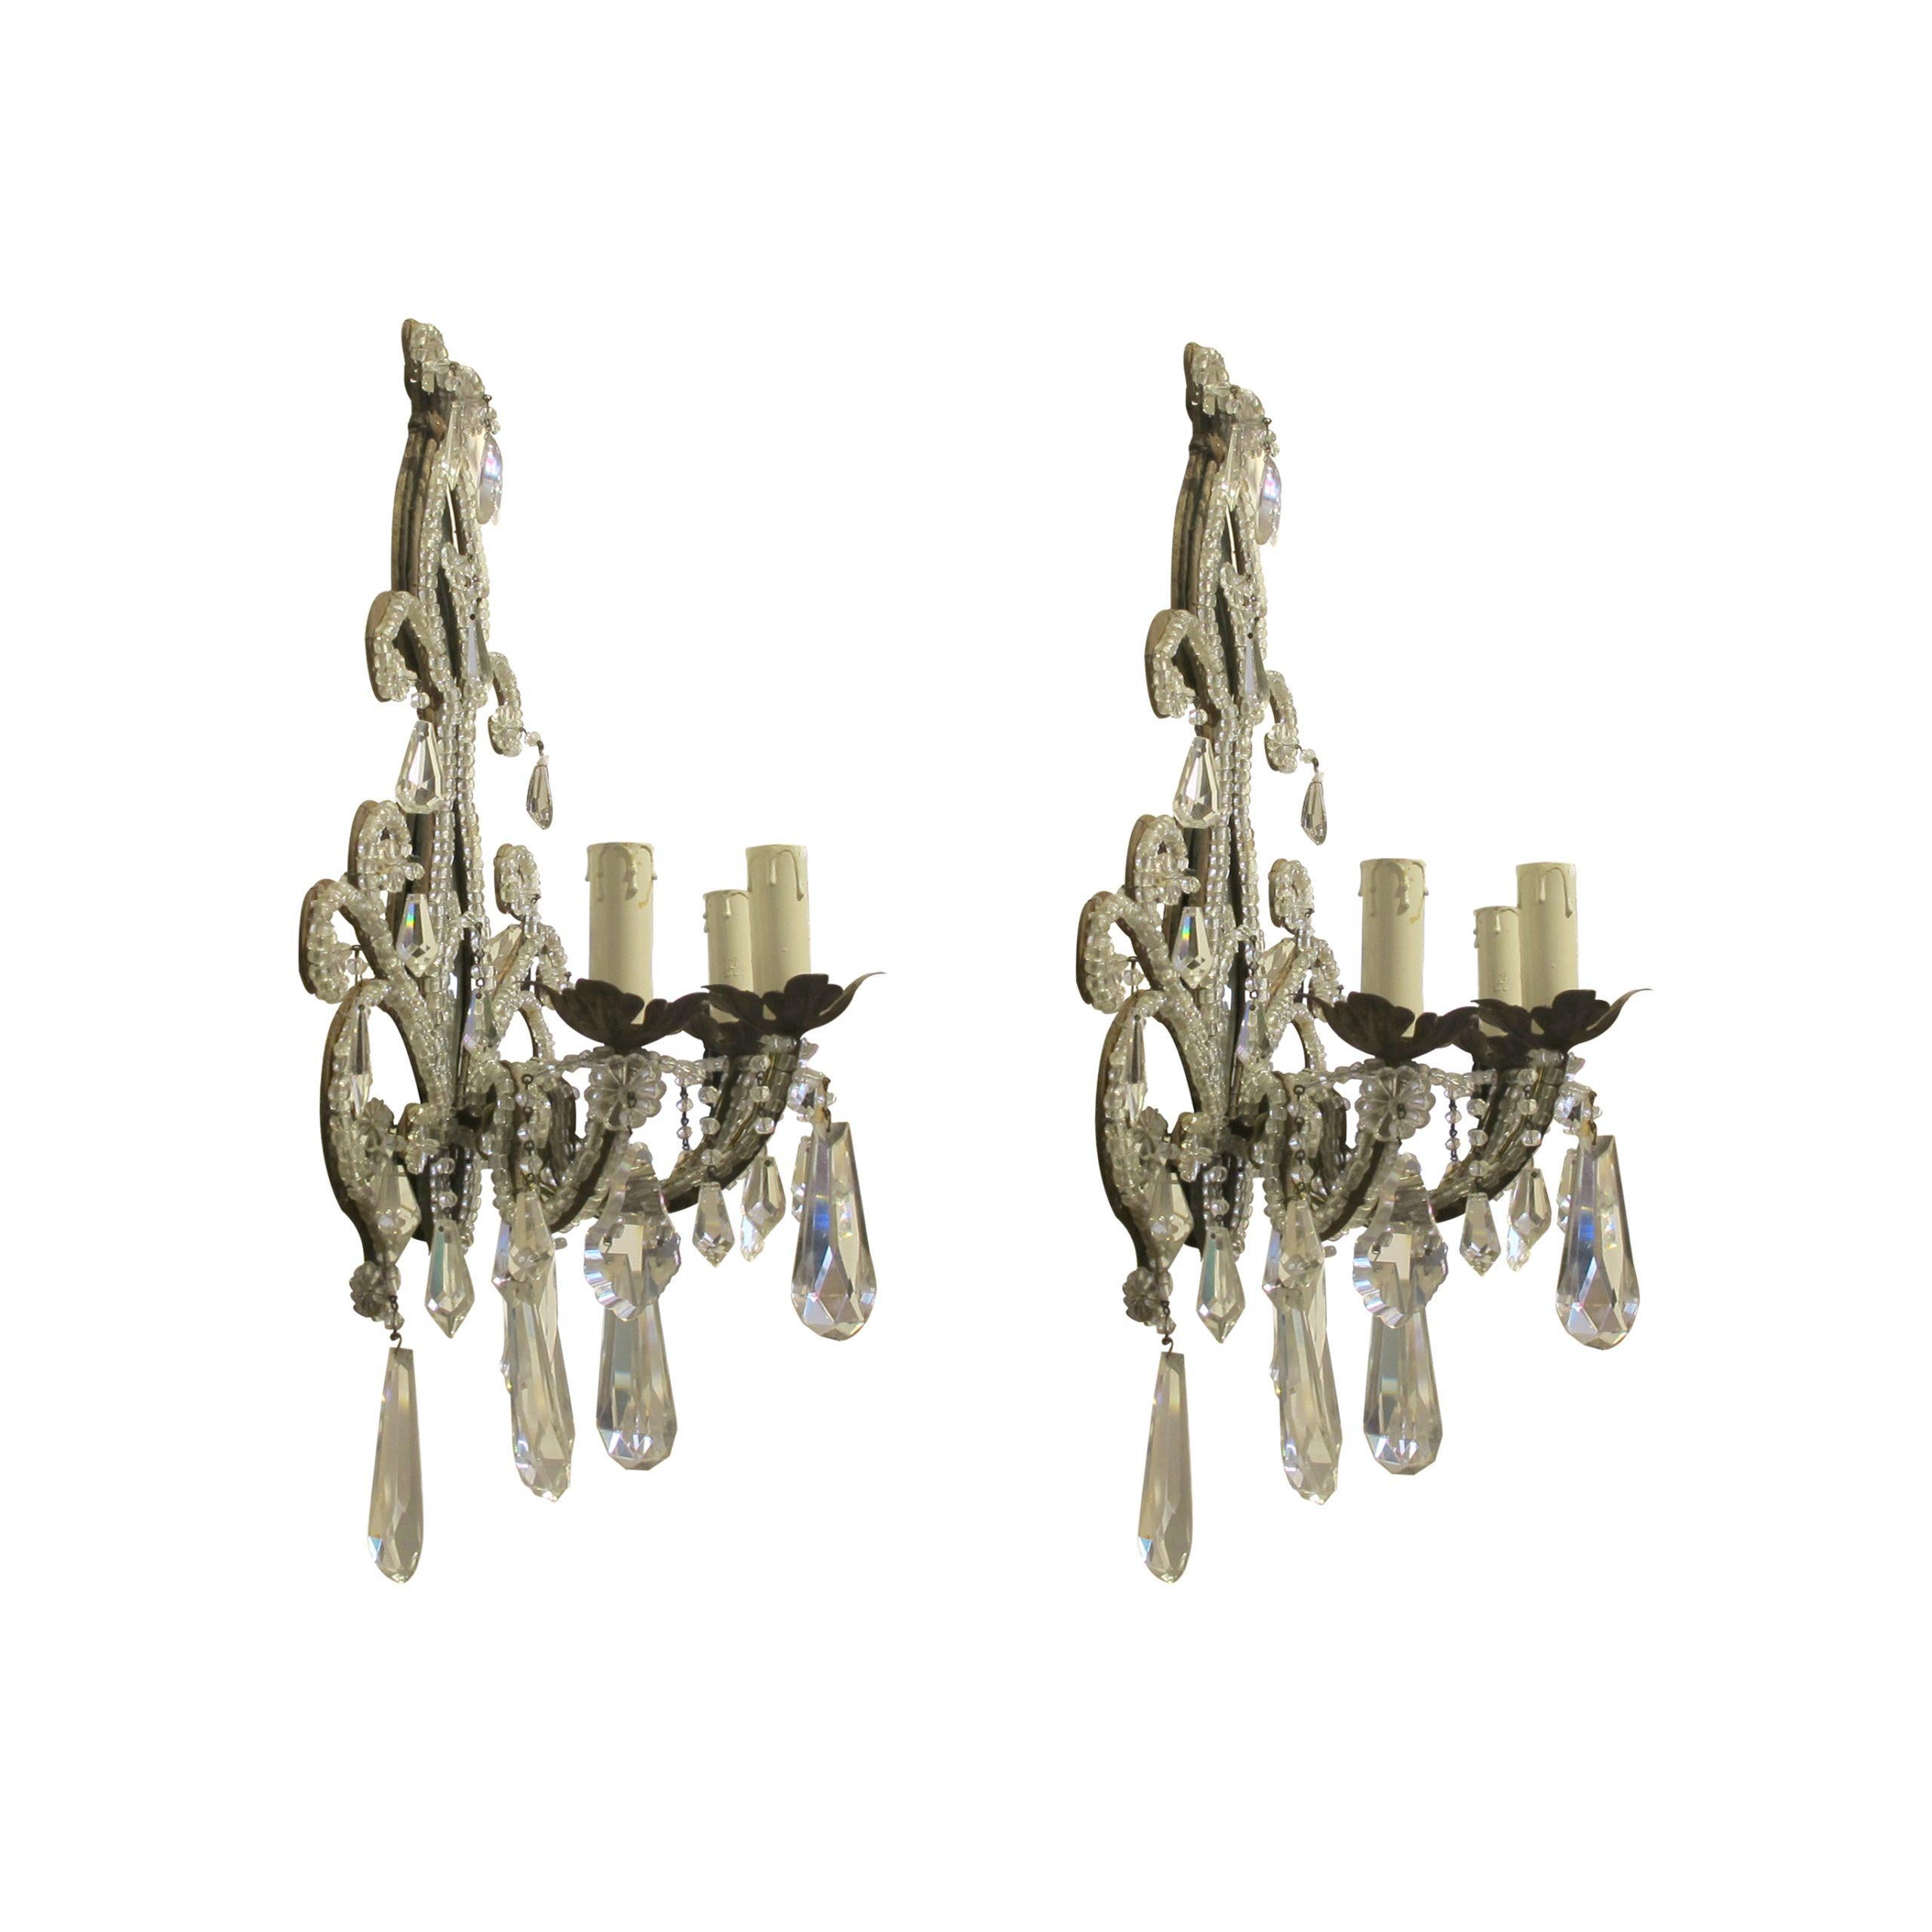 Beaded Pair of Early 20th Century French Wall Sconces Lights with Crystal Beads